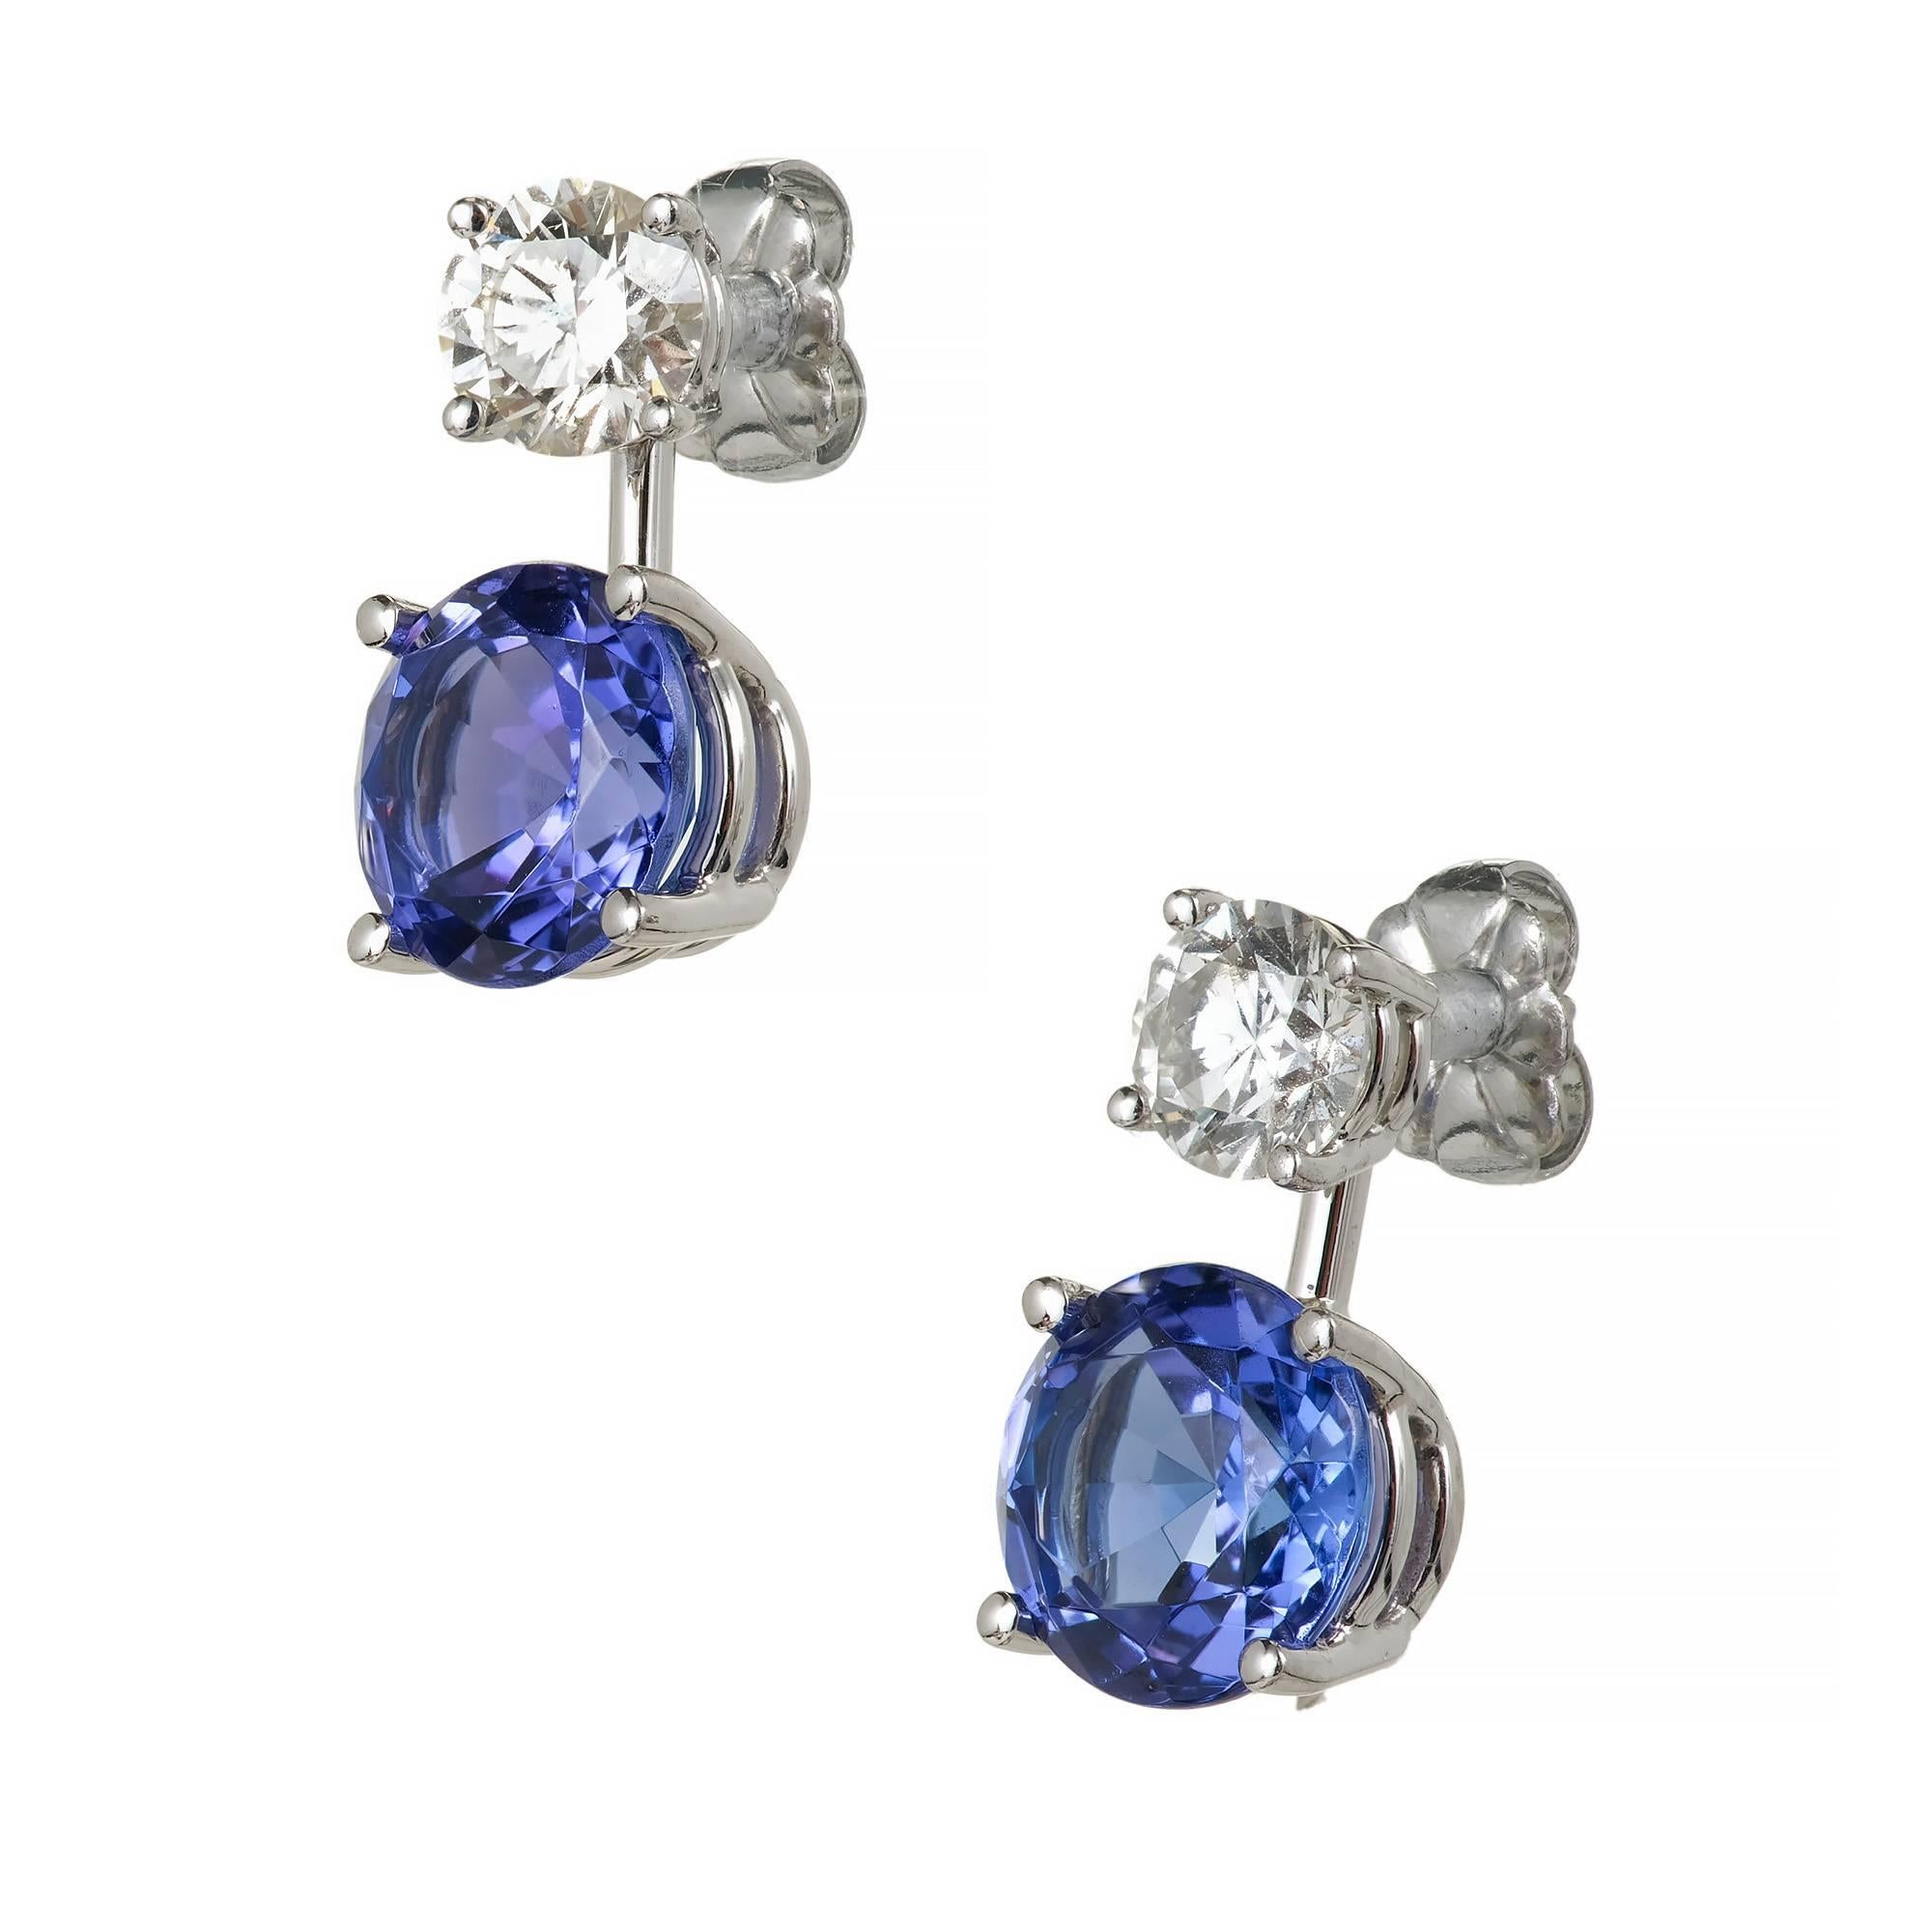 Peter Suchy Jewelers custom design Diamond and Tanzanite dangle earrings. The Diamond studs can be worn alone or with the detachable bright blue Tanzanite dangles. Platinum custom made settings.

2 round brilliant cut Diamonds, approx. total weight